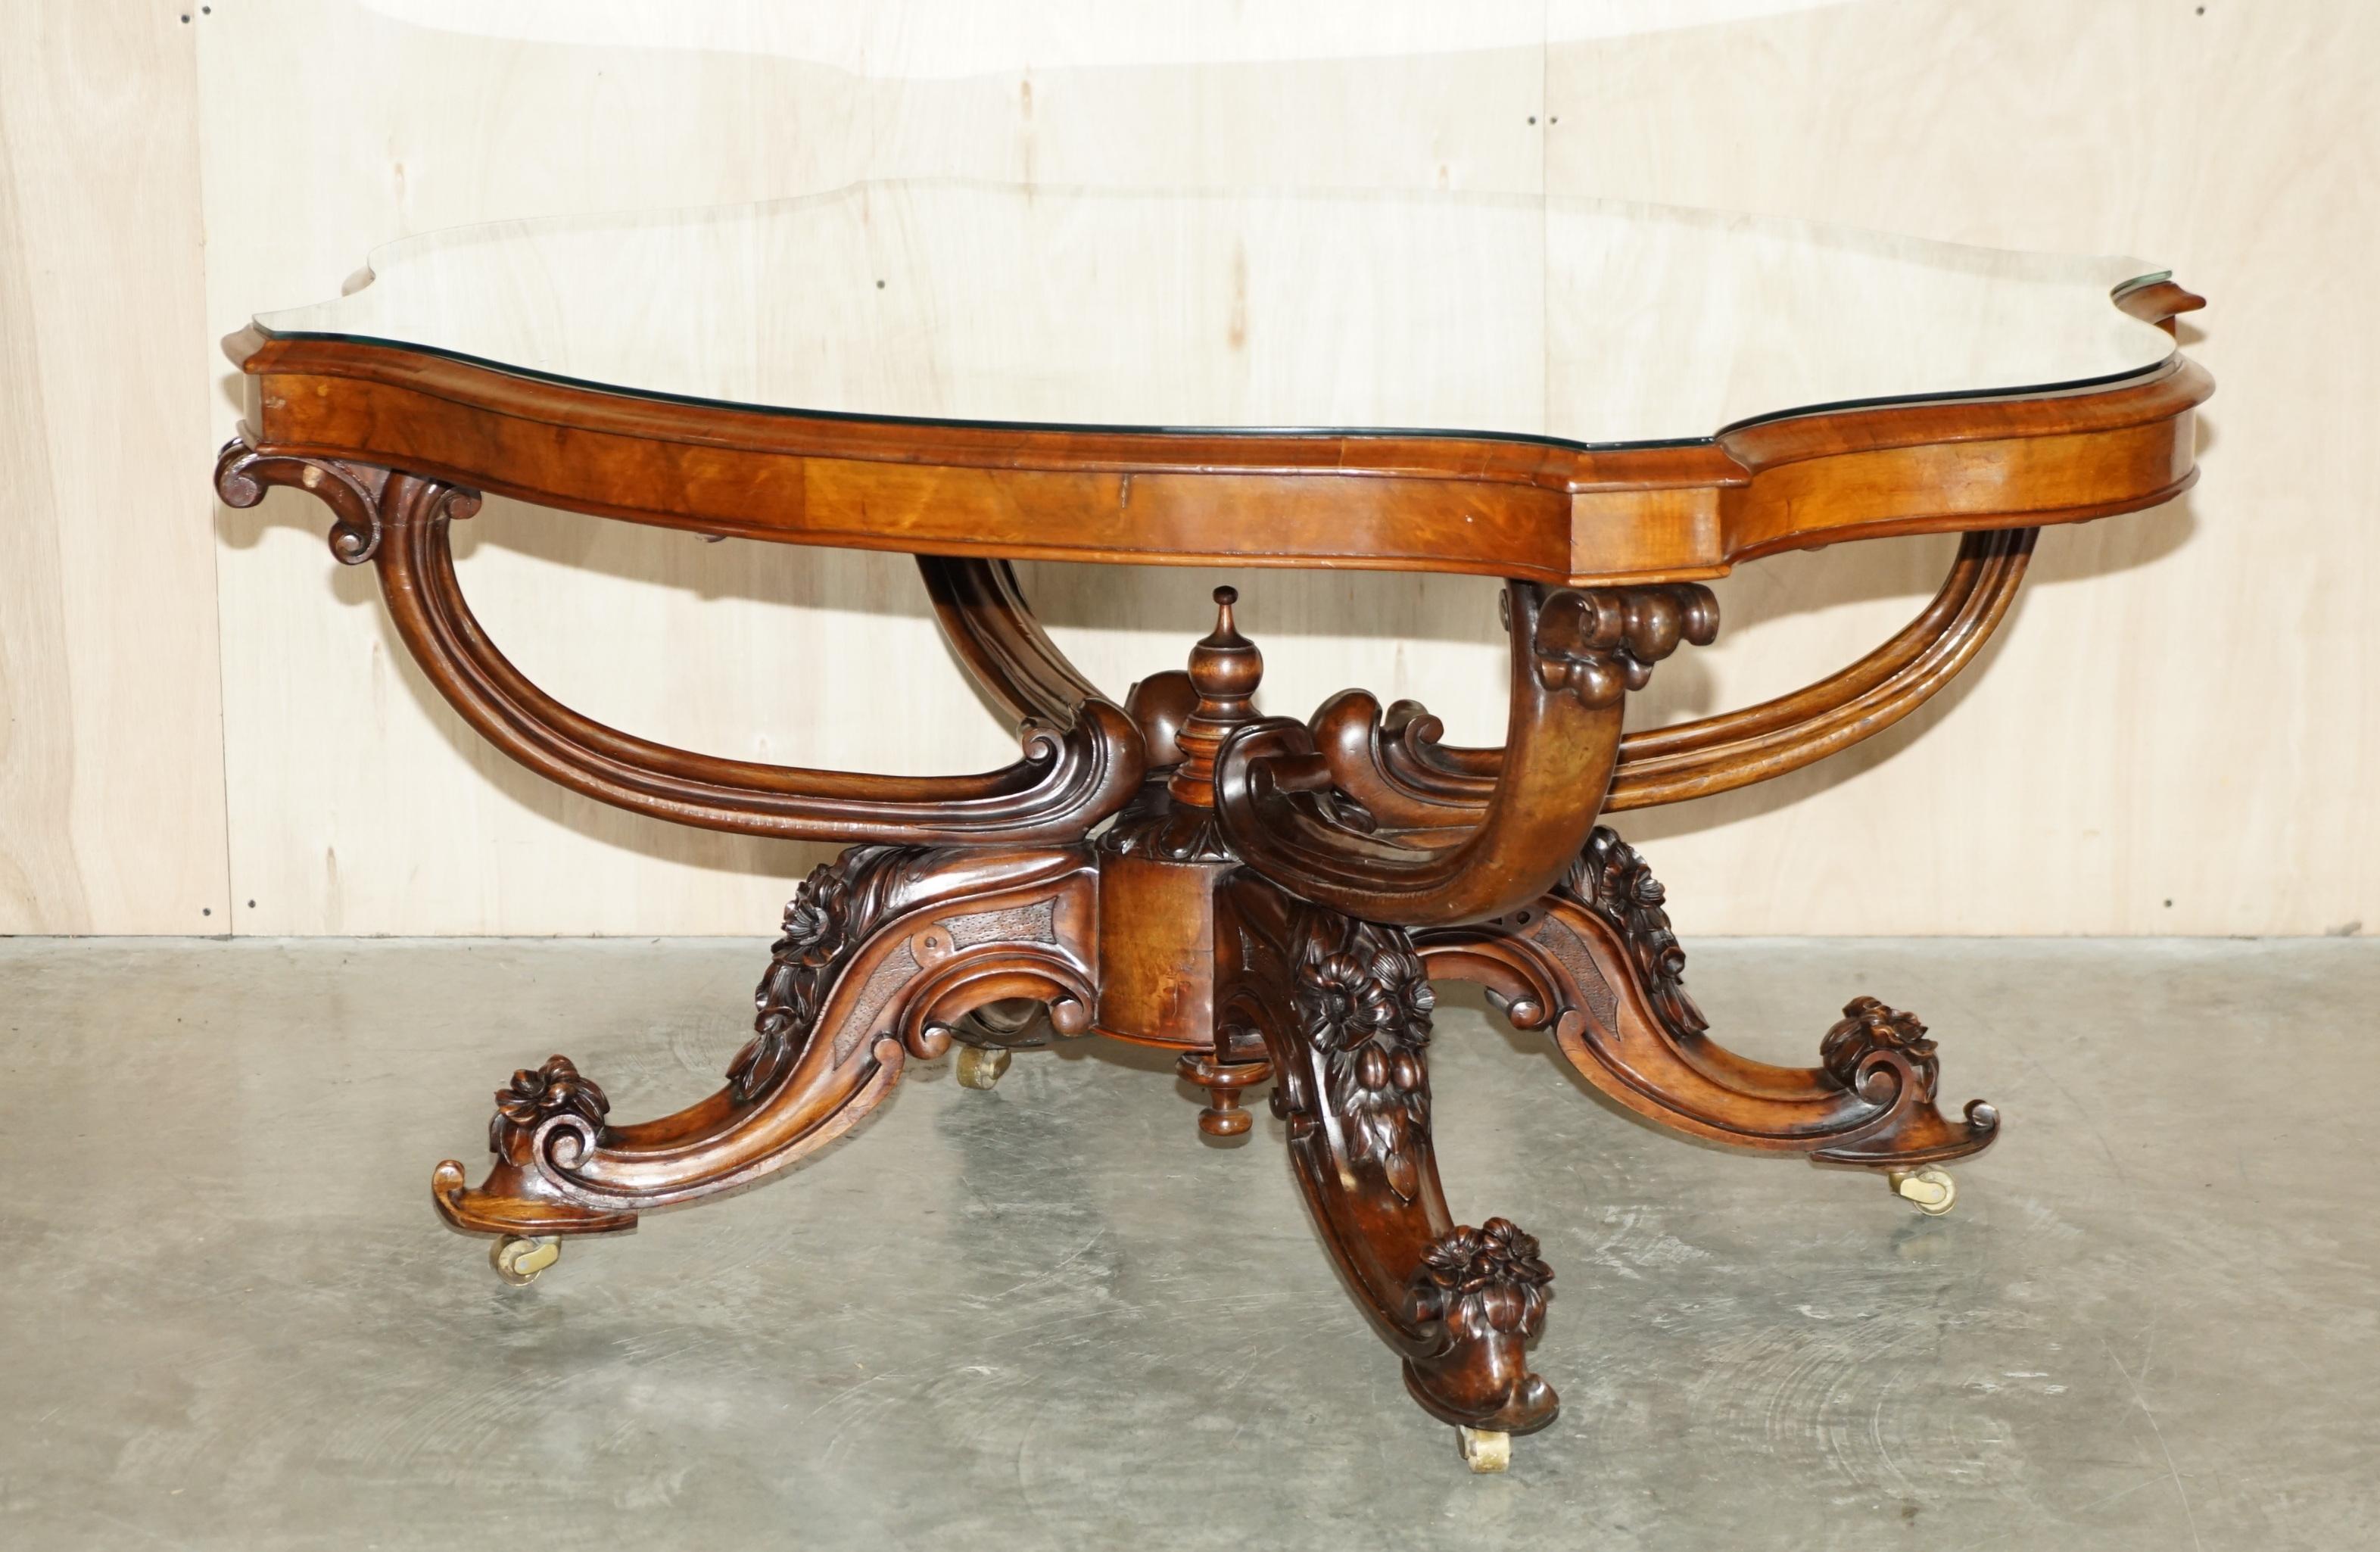 We are delighted to offer for sale this lovely hand made in England circa 1860, large centre occasional table

A good looking, well made and decorative piece, I have never seen one of this size before and with this quality of carving the base, its